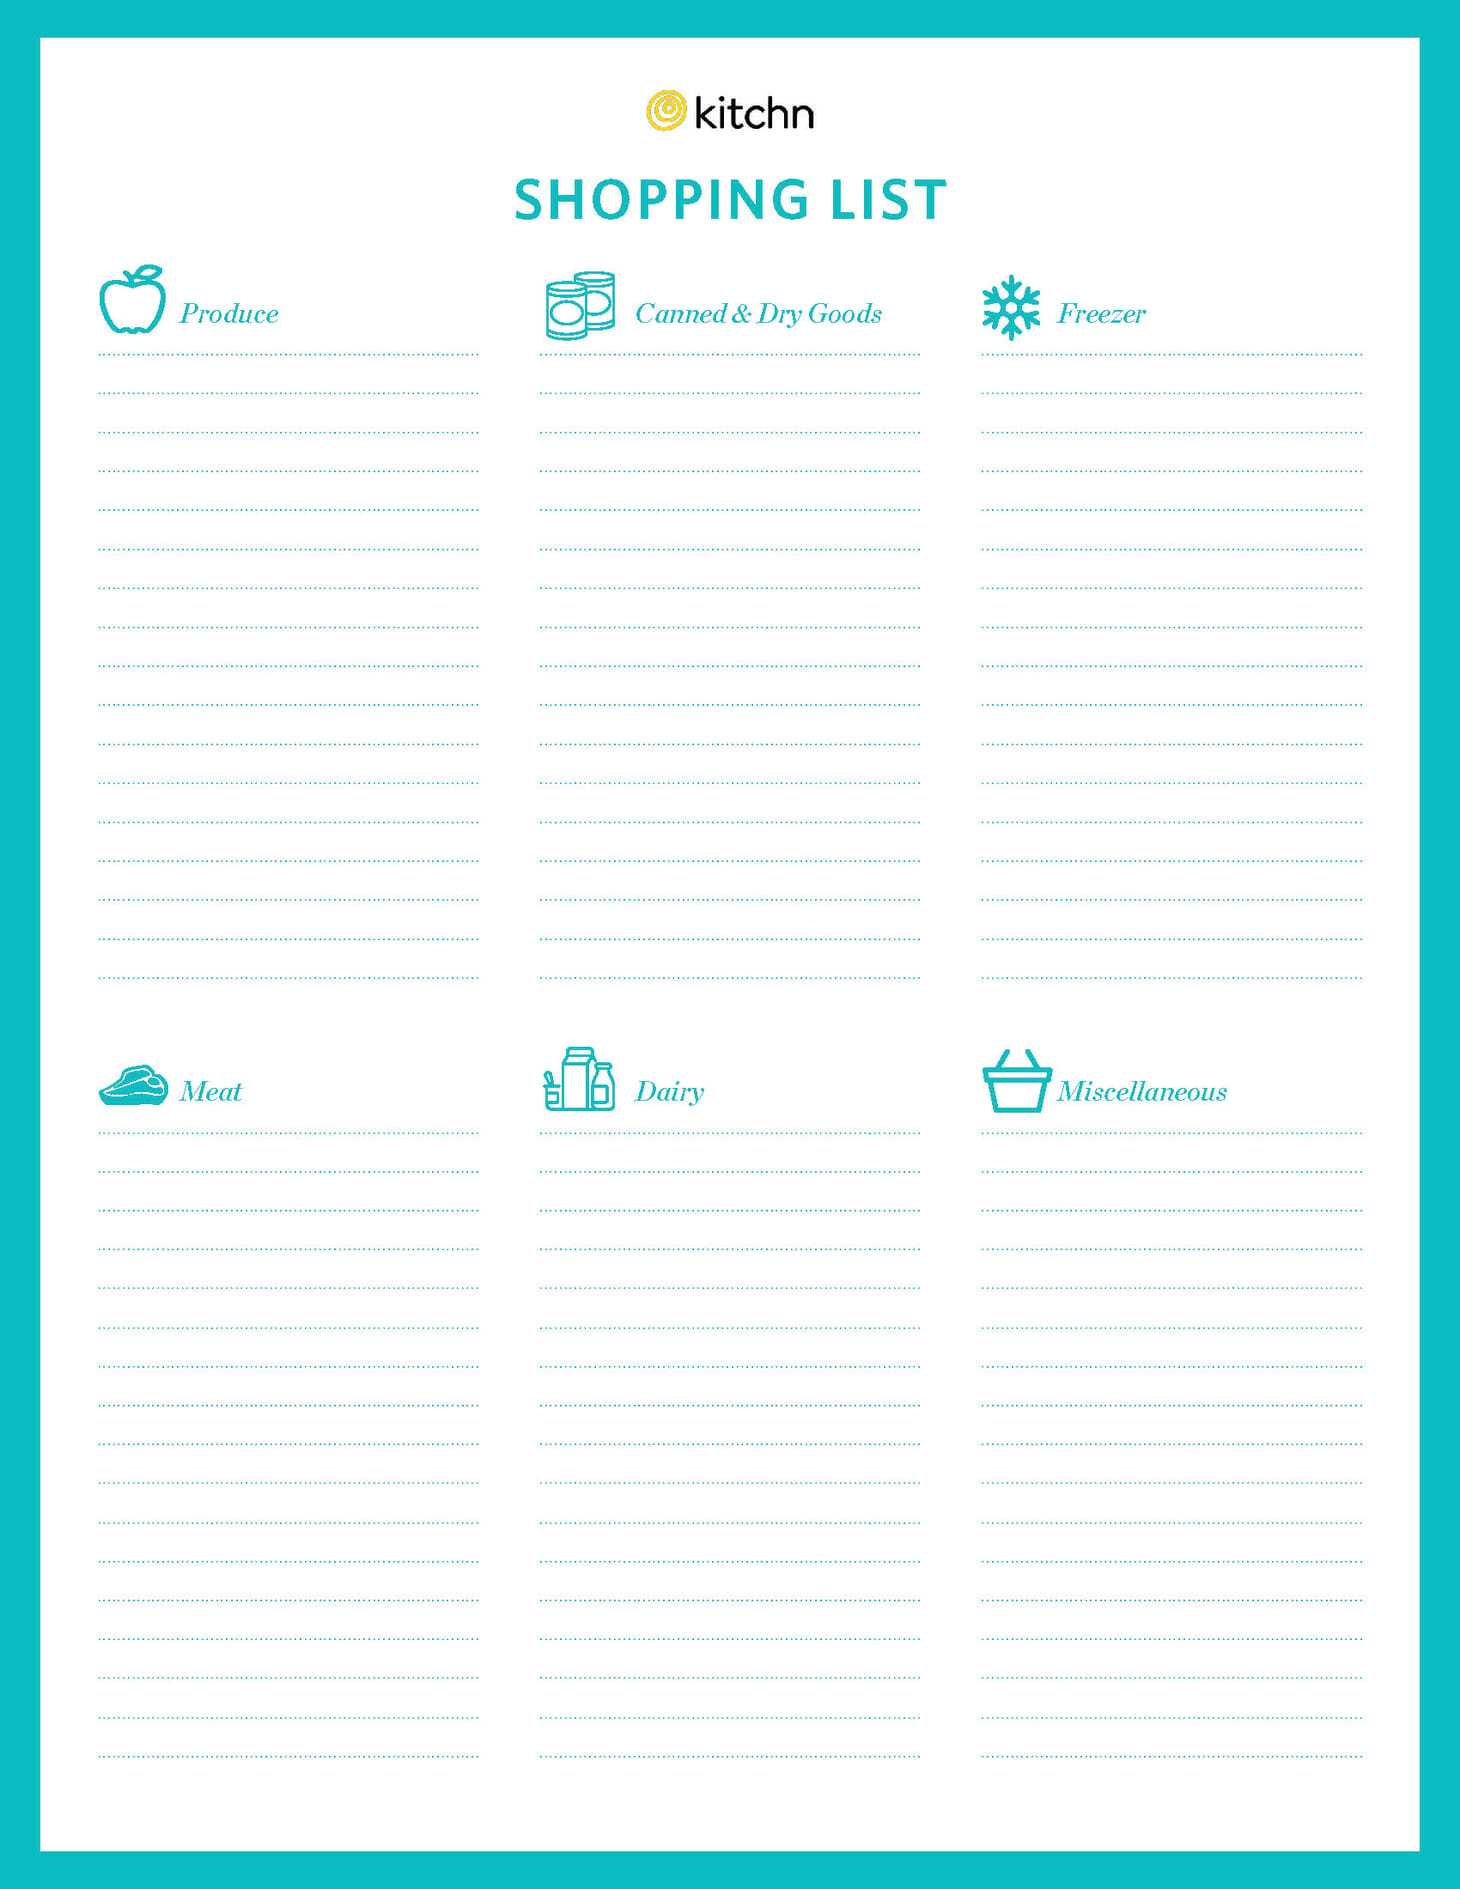 Download Our Free Printable Grocery Shopping List | Kitchn Within Blank Grocery Shopping List Template